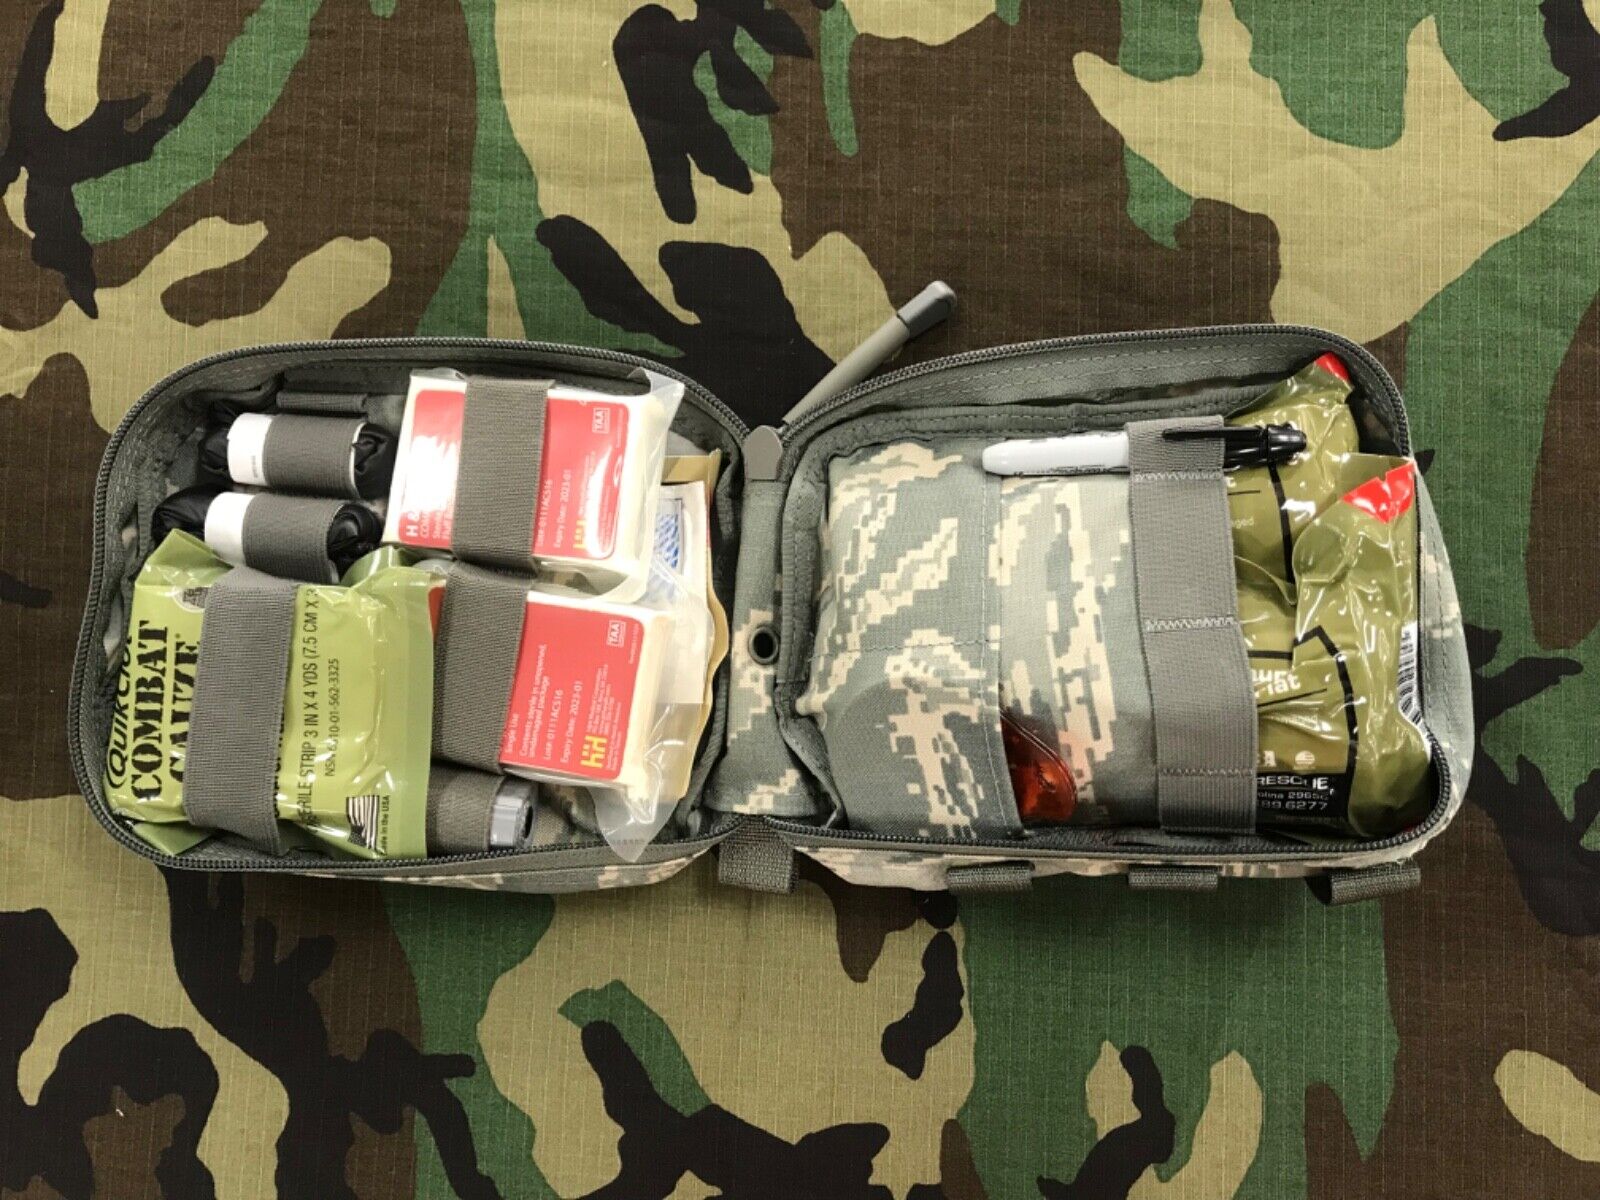 US Military MOLLE JFAK Joint First Aid Kit IFAK with Supplies PLUS 2 TOURNIQUETS